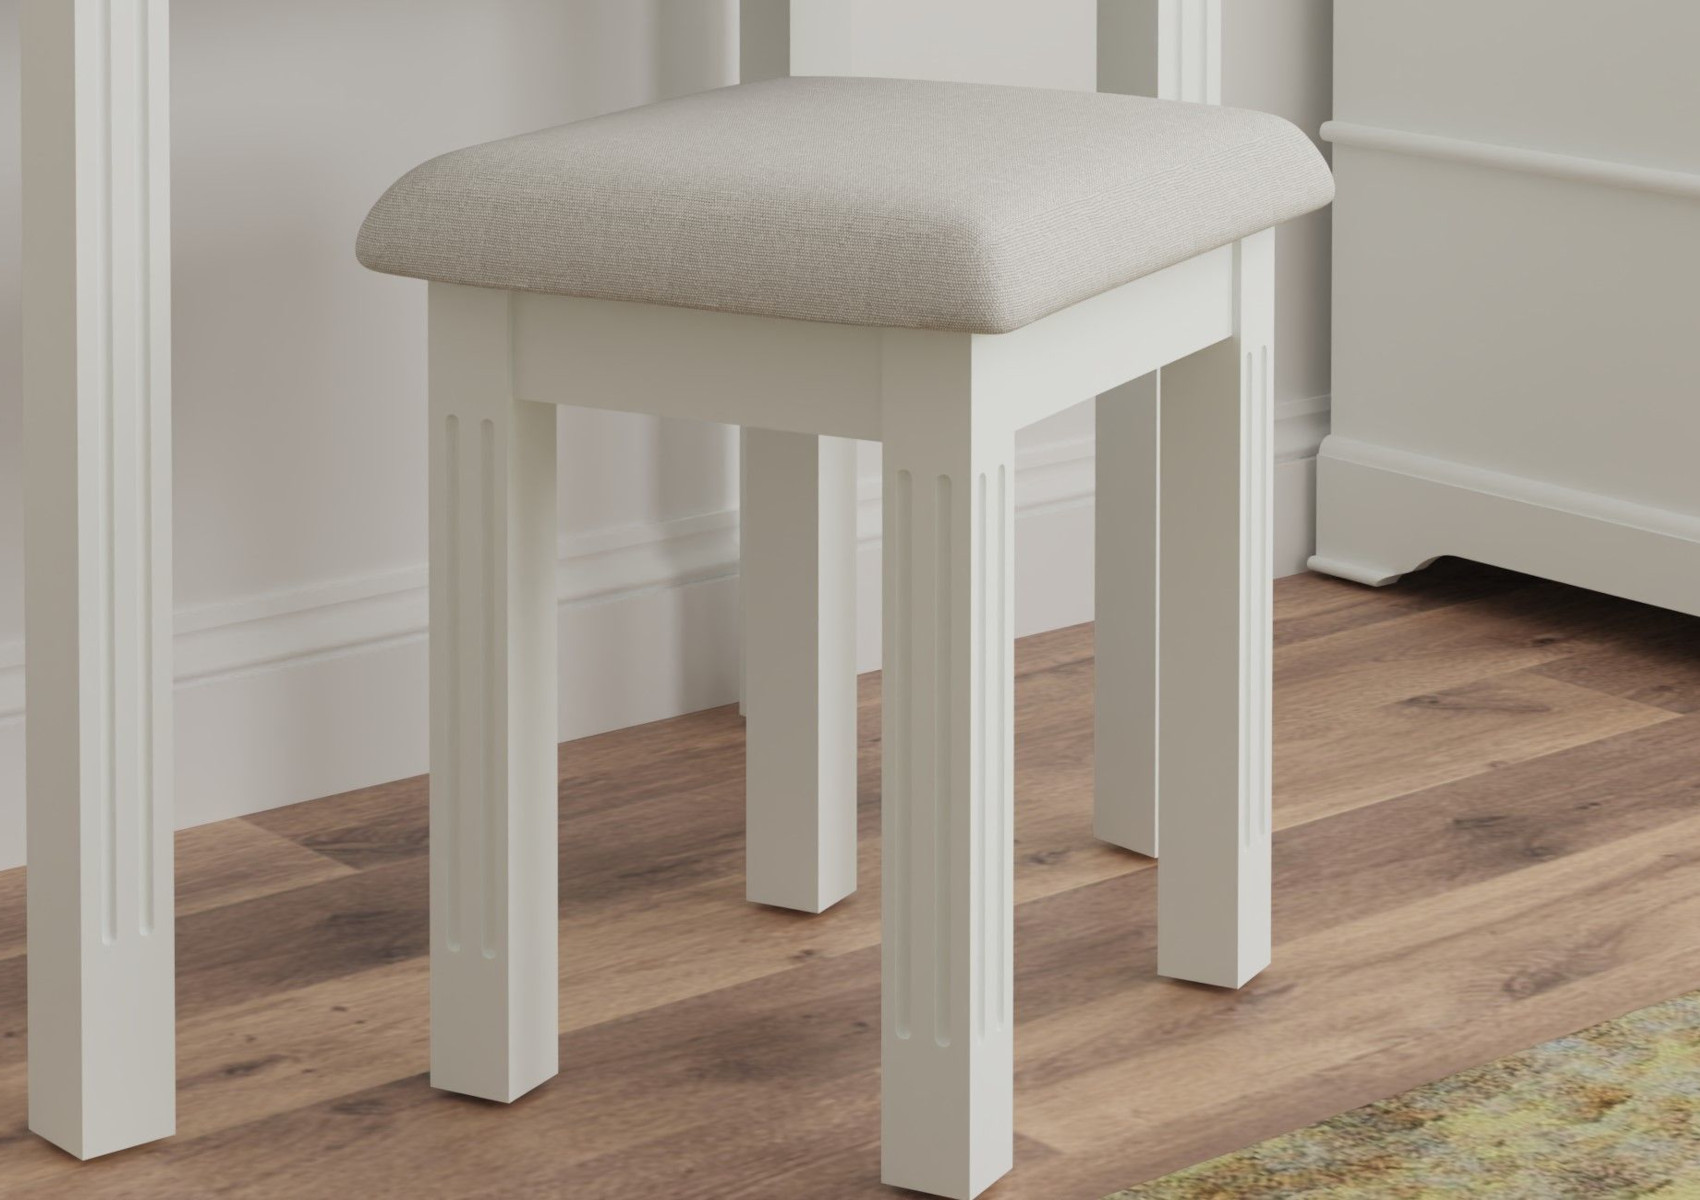 View Tilly White Dressing Table Stool Time4Sleep information